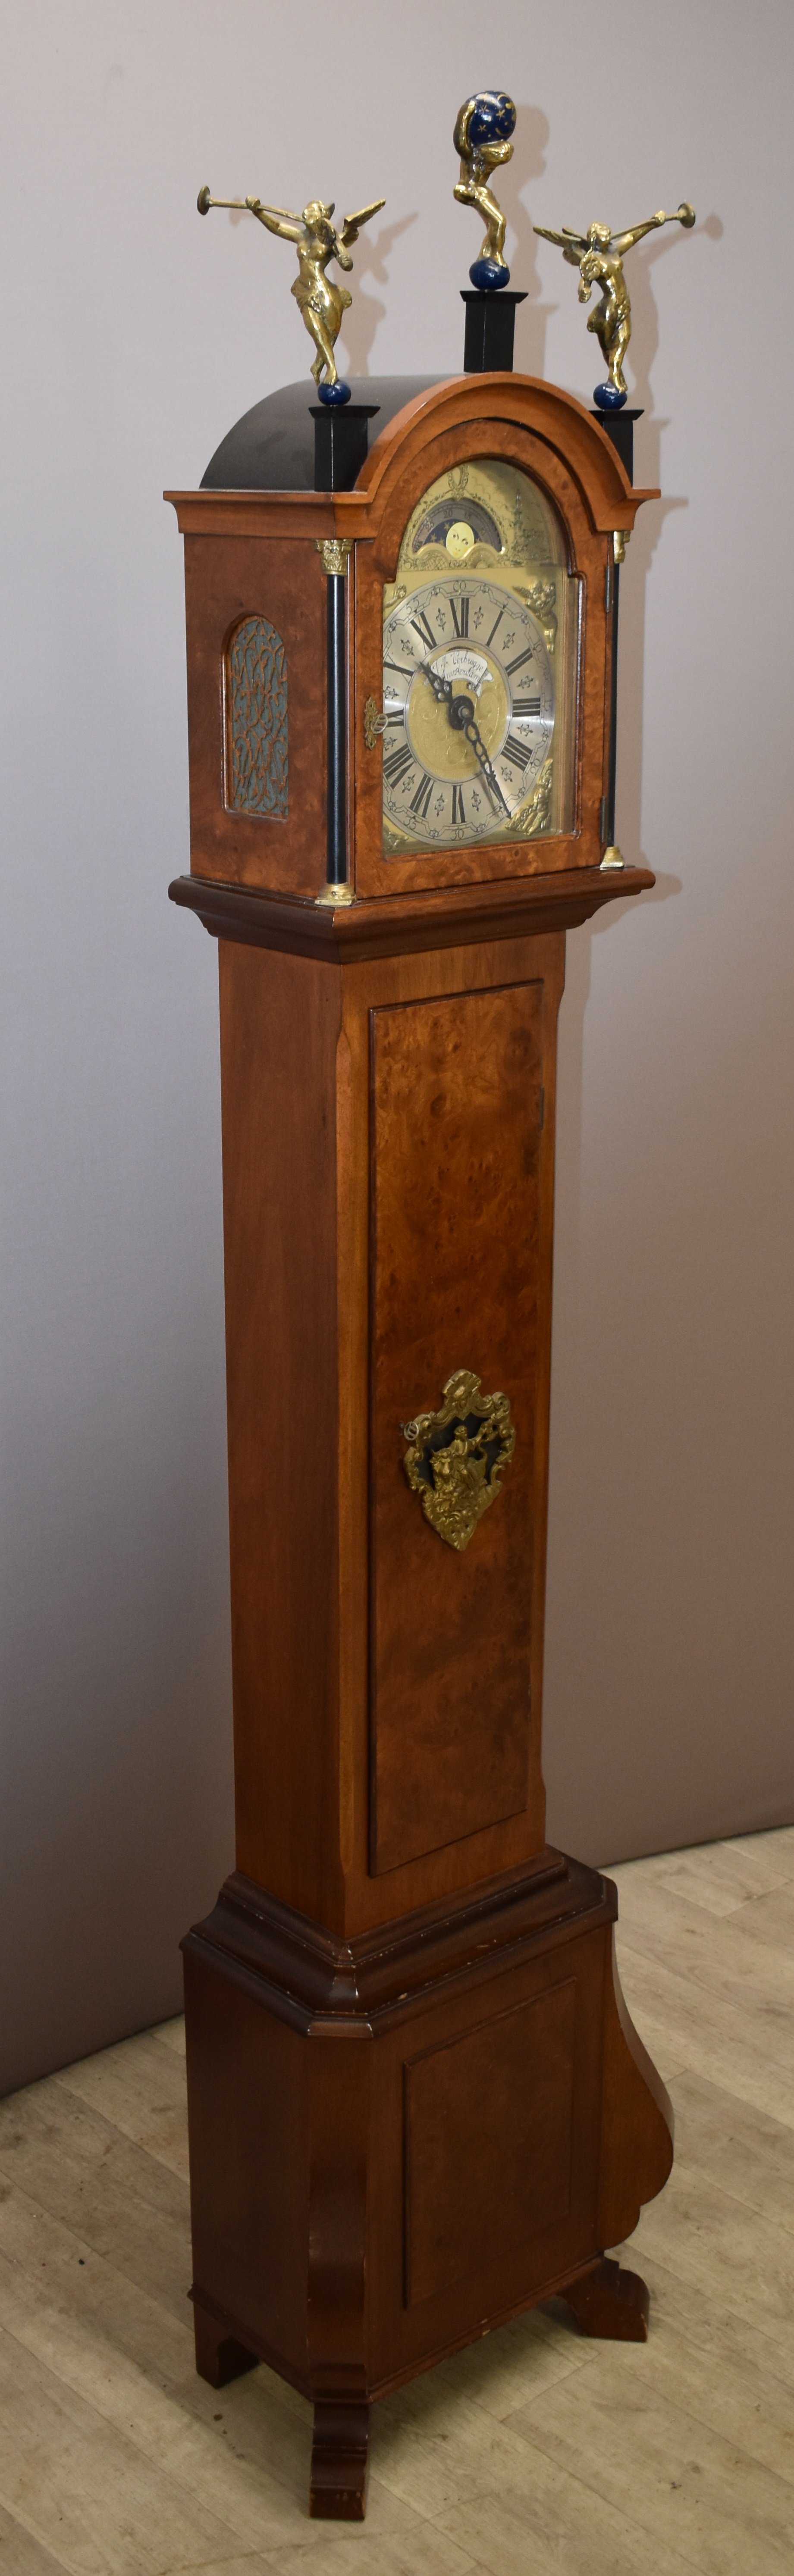 Walnut cased grandmother clock with figural decoration, moonphase, date and J M Verbrugge, Amsterdam - Image 2 of 5